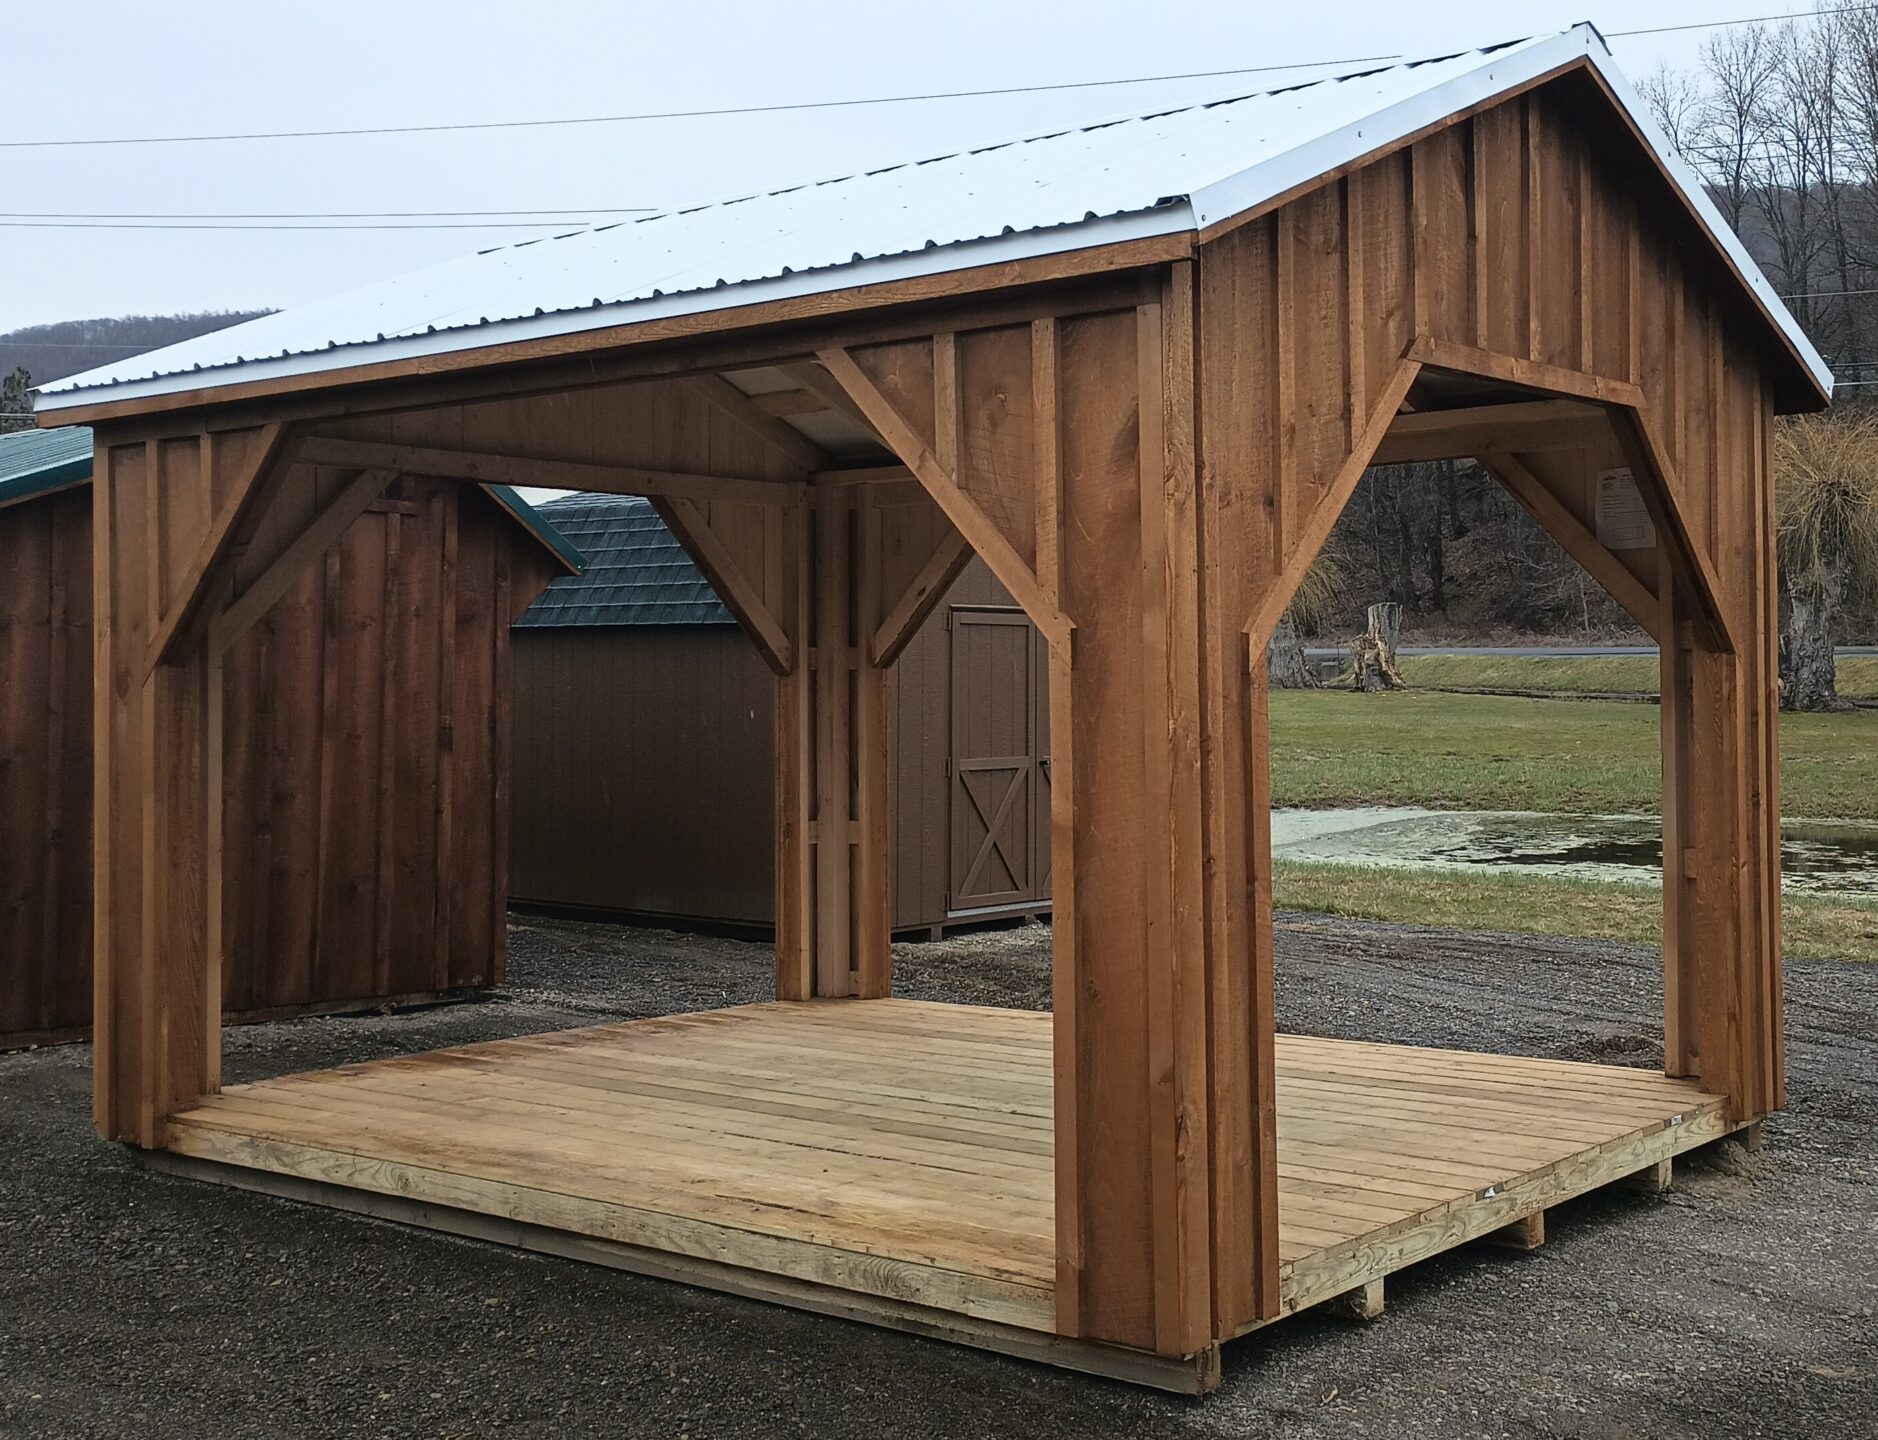 Open sided pavilion with floor and metal roof